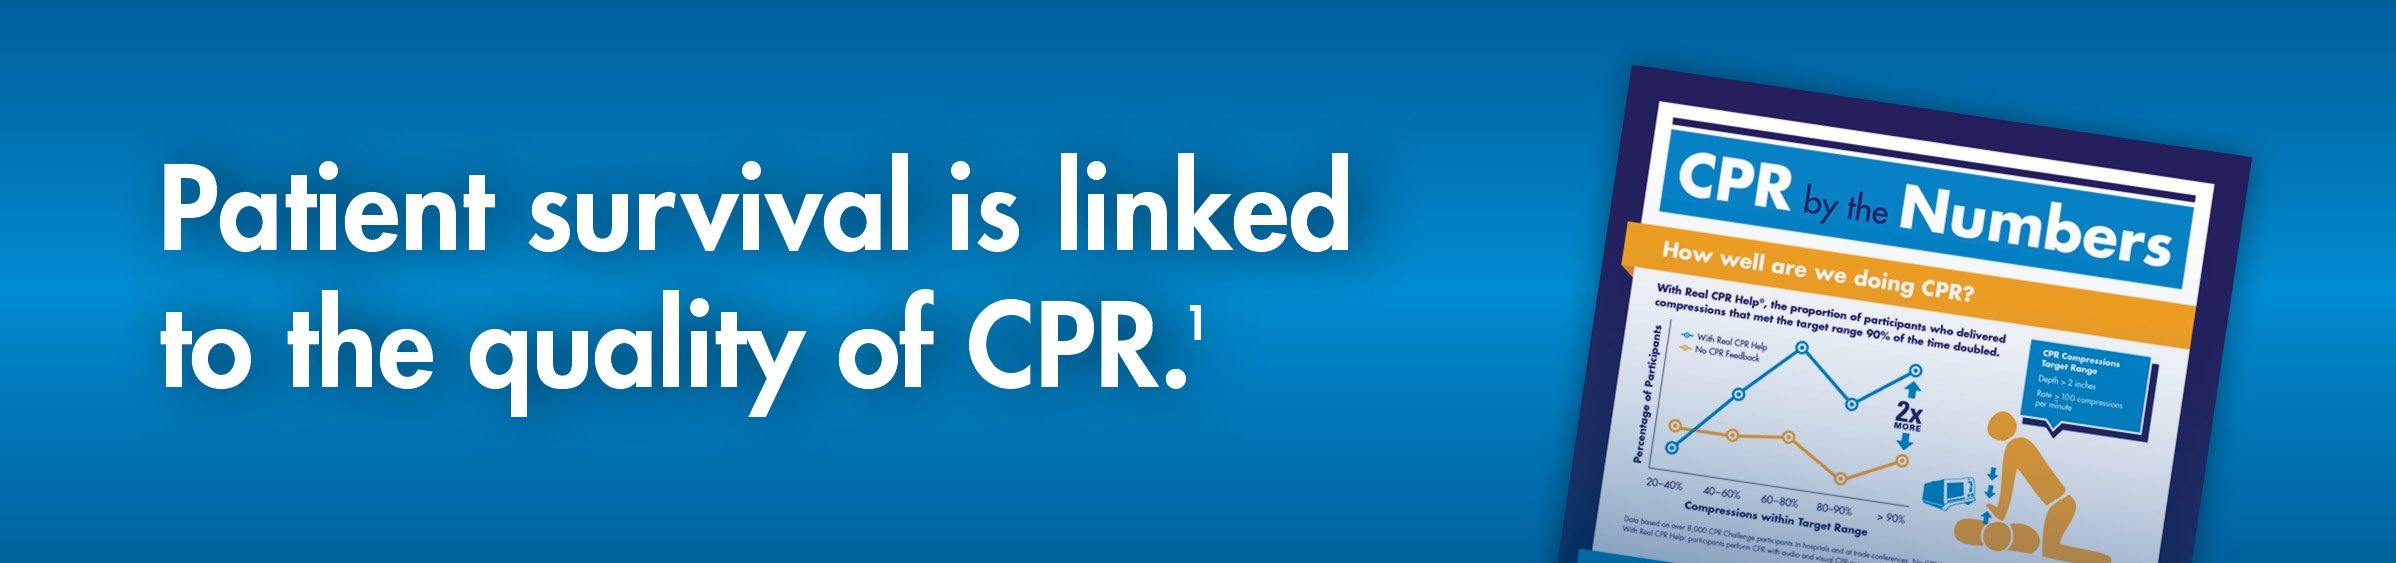 CPR_by_the_Numbers_Landing_Page